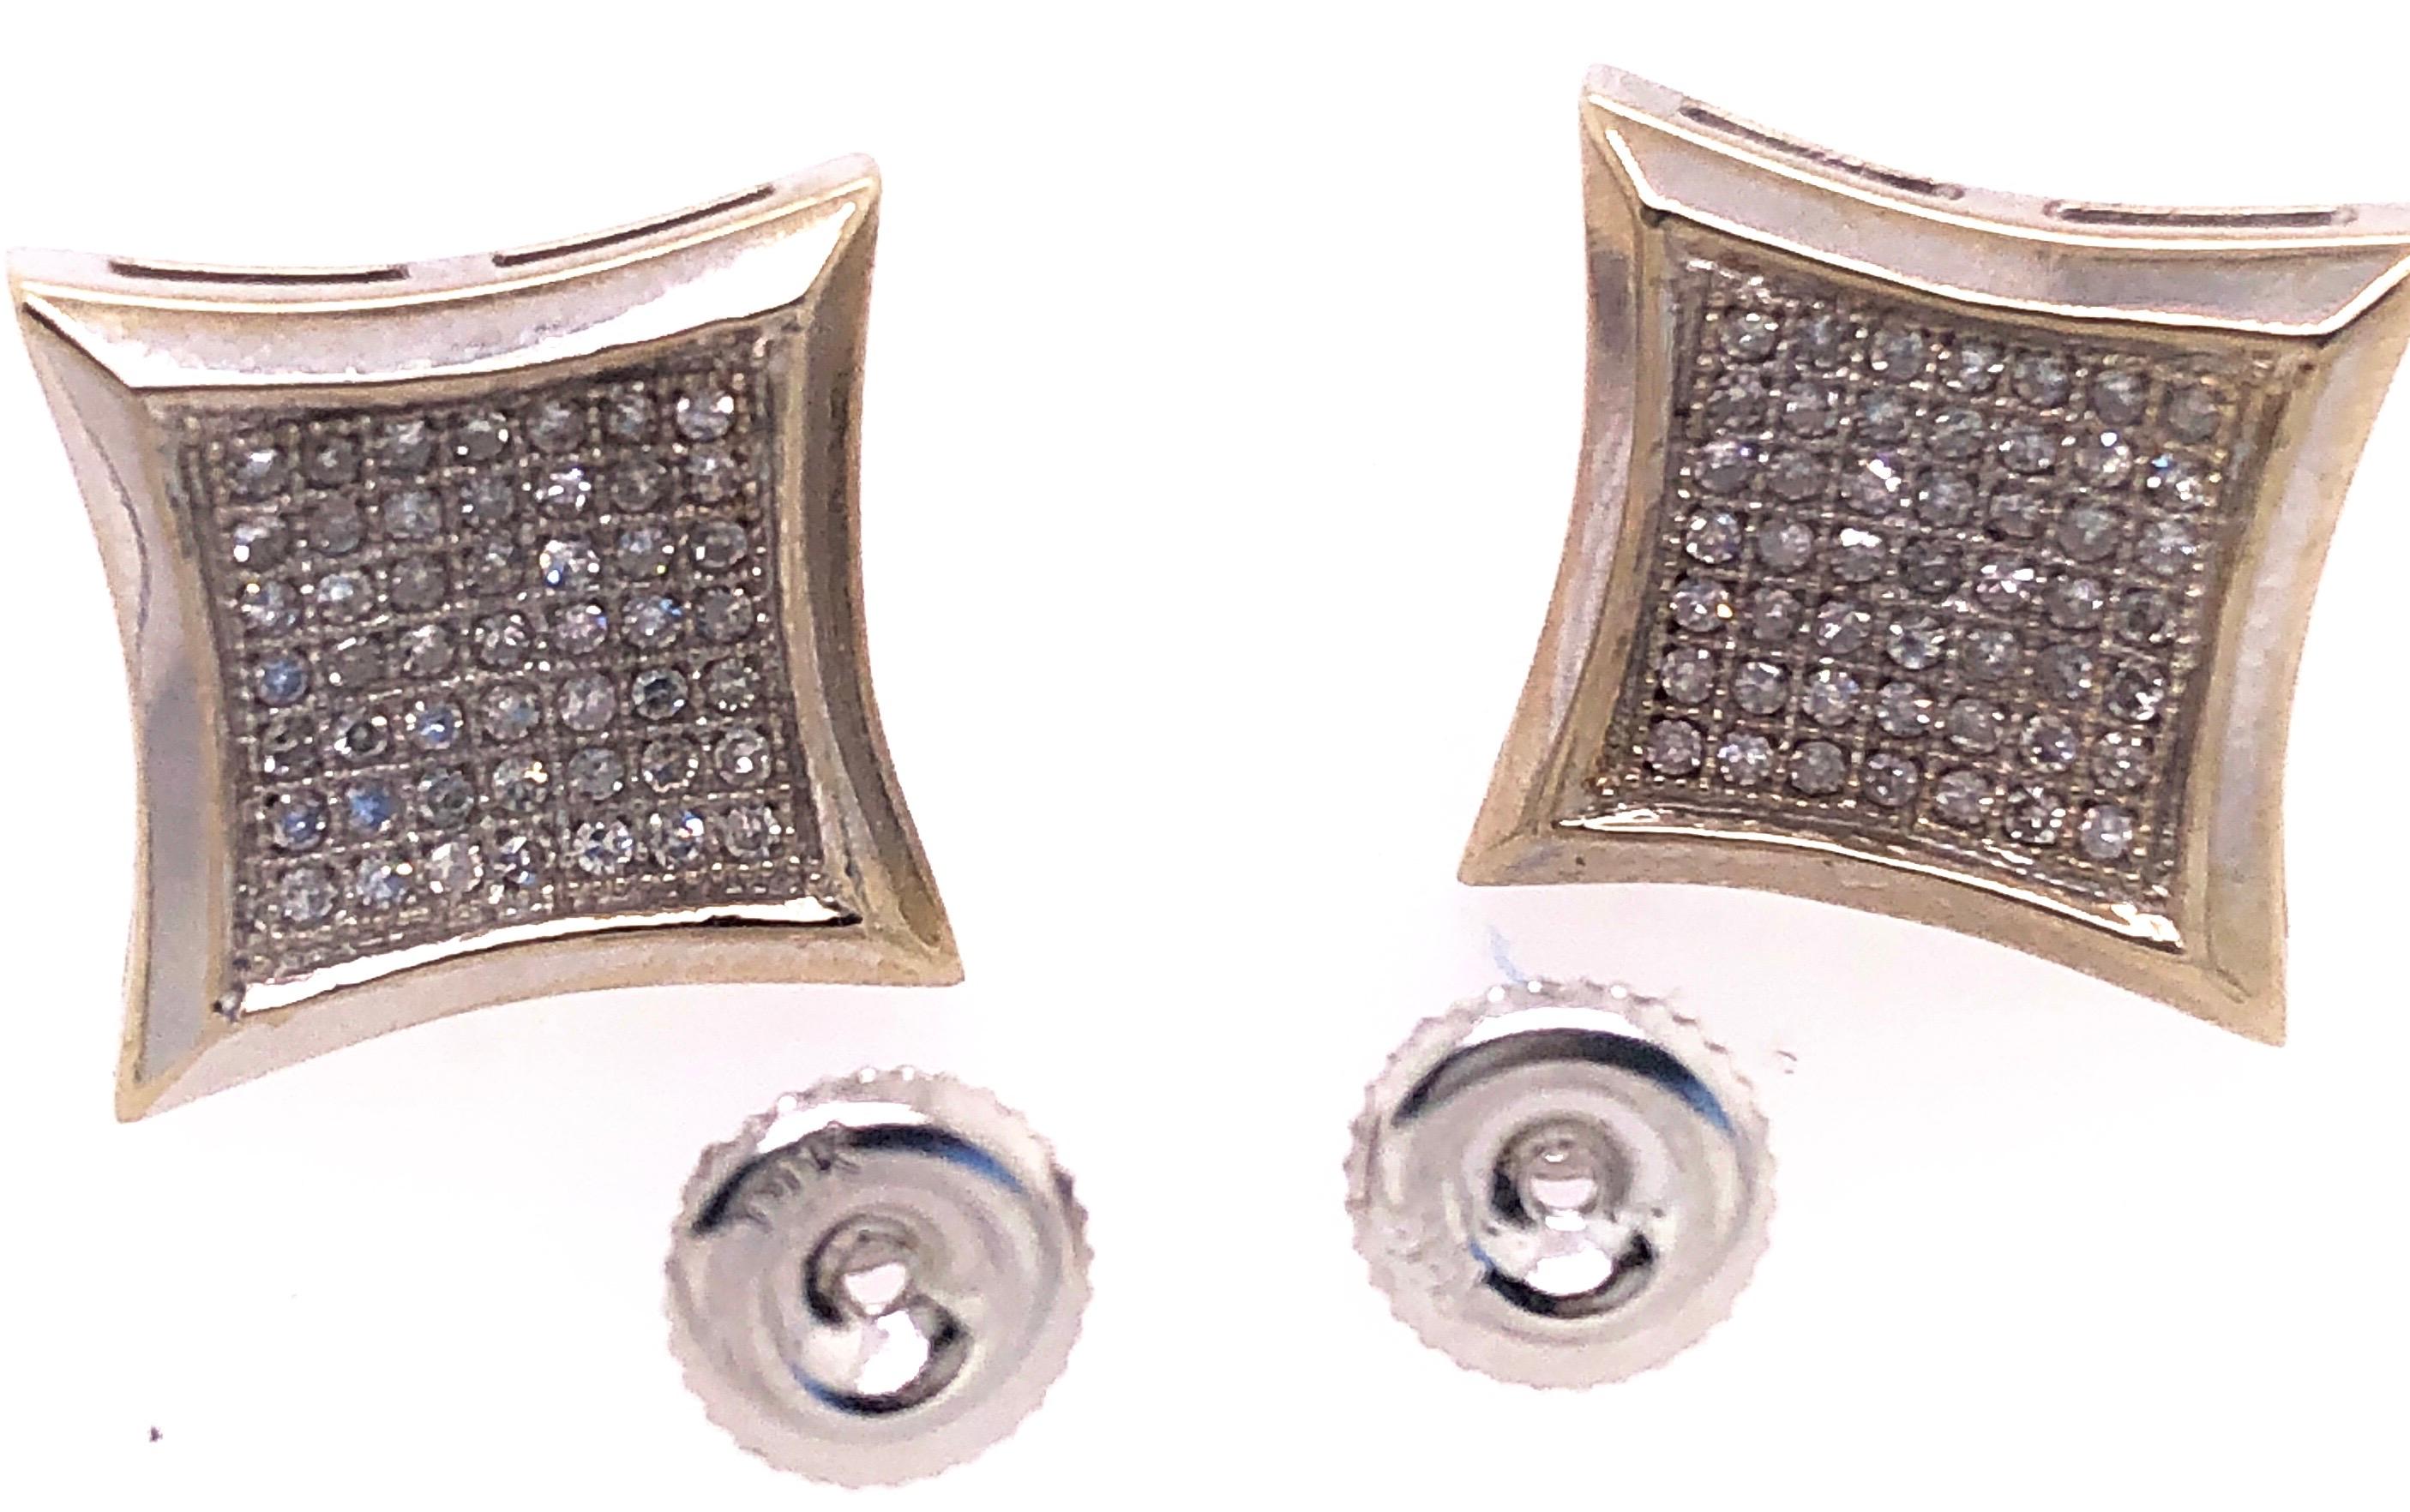 14 Karat Two Tone Gold Button earrings with Diamonds 1.00 Total Diamond Weight..
4 grams total weight